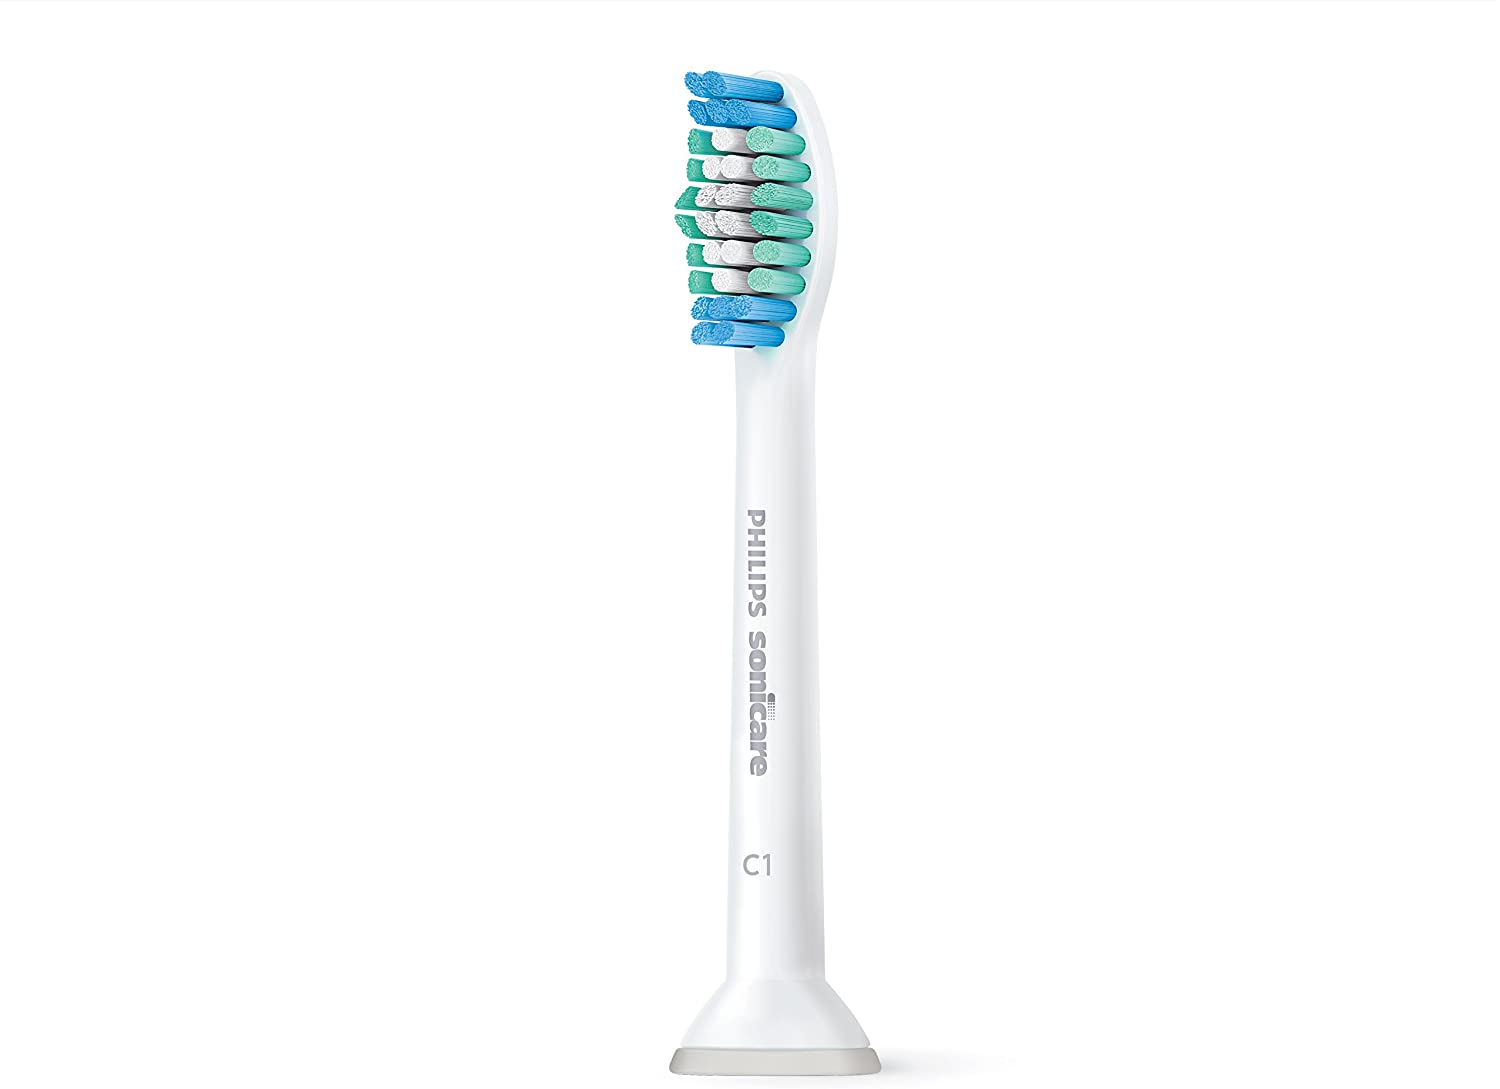 Philips Sonicare Original Basic Clean HX6010/30 brush, 1.5x more plaque removal, standard, pack of 10, White Single